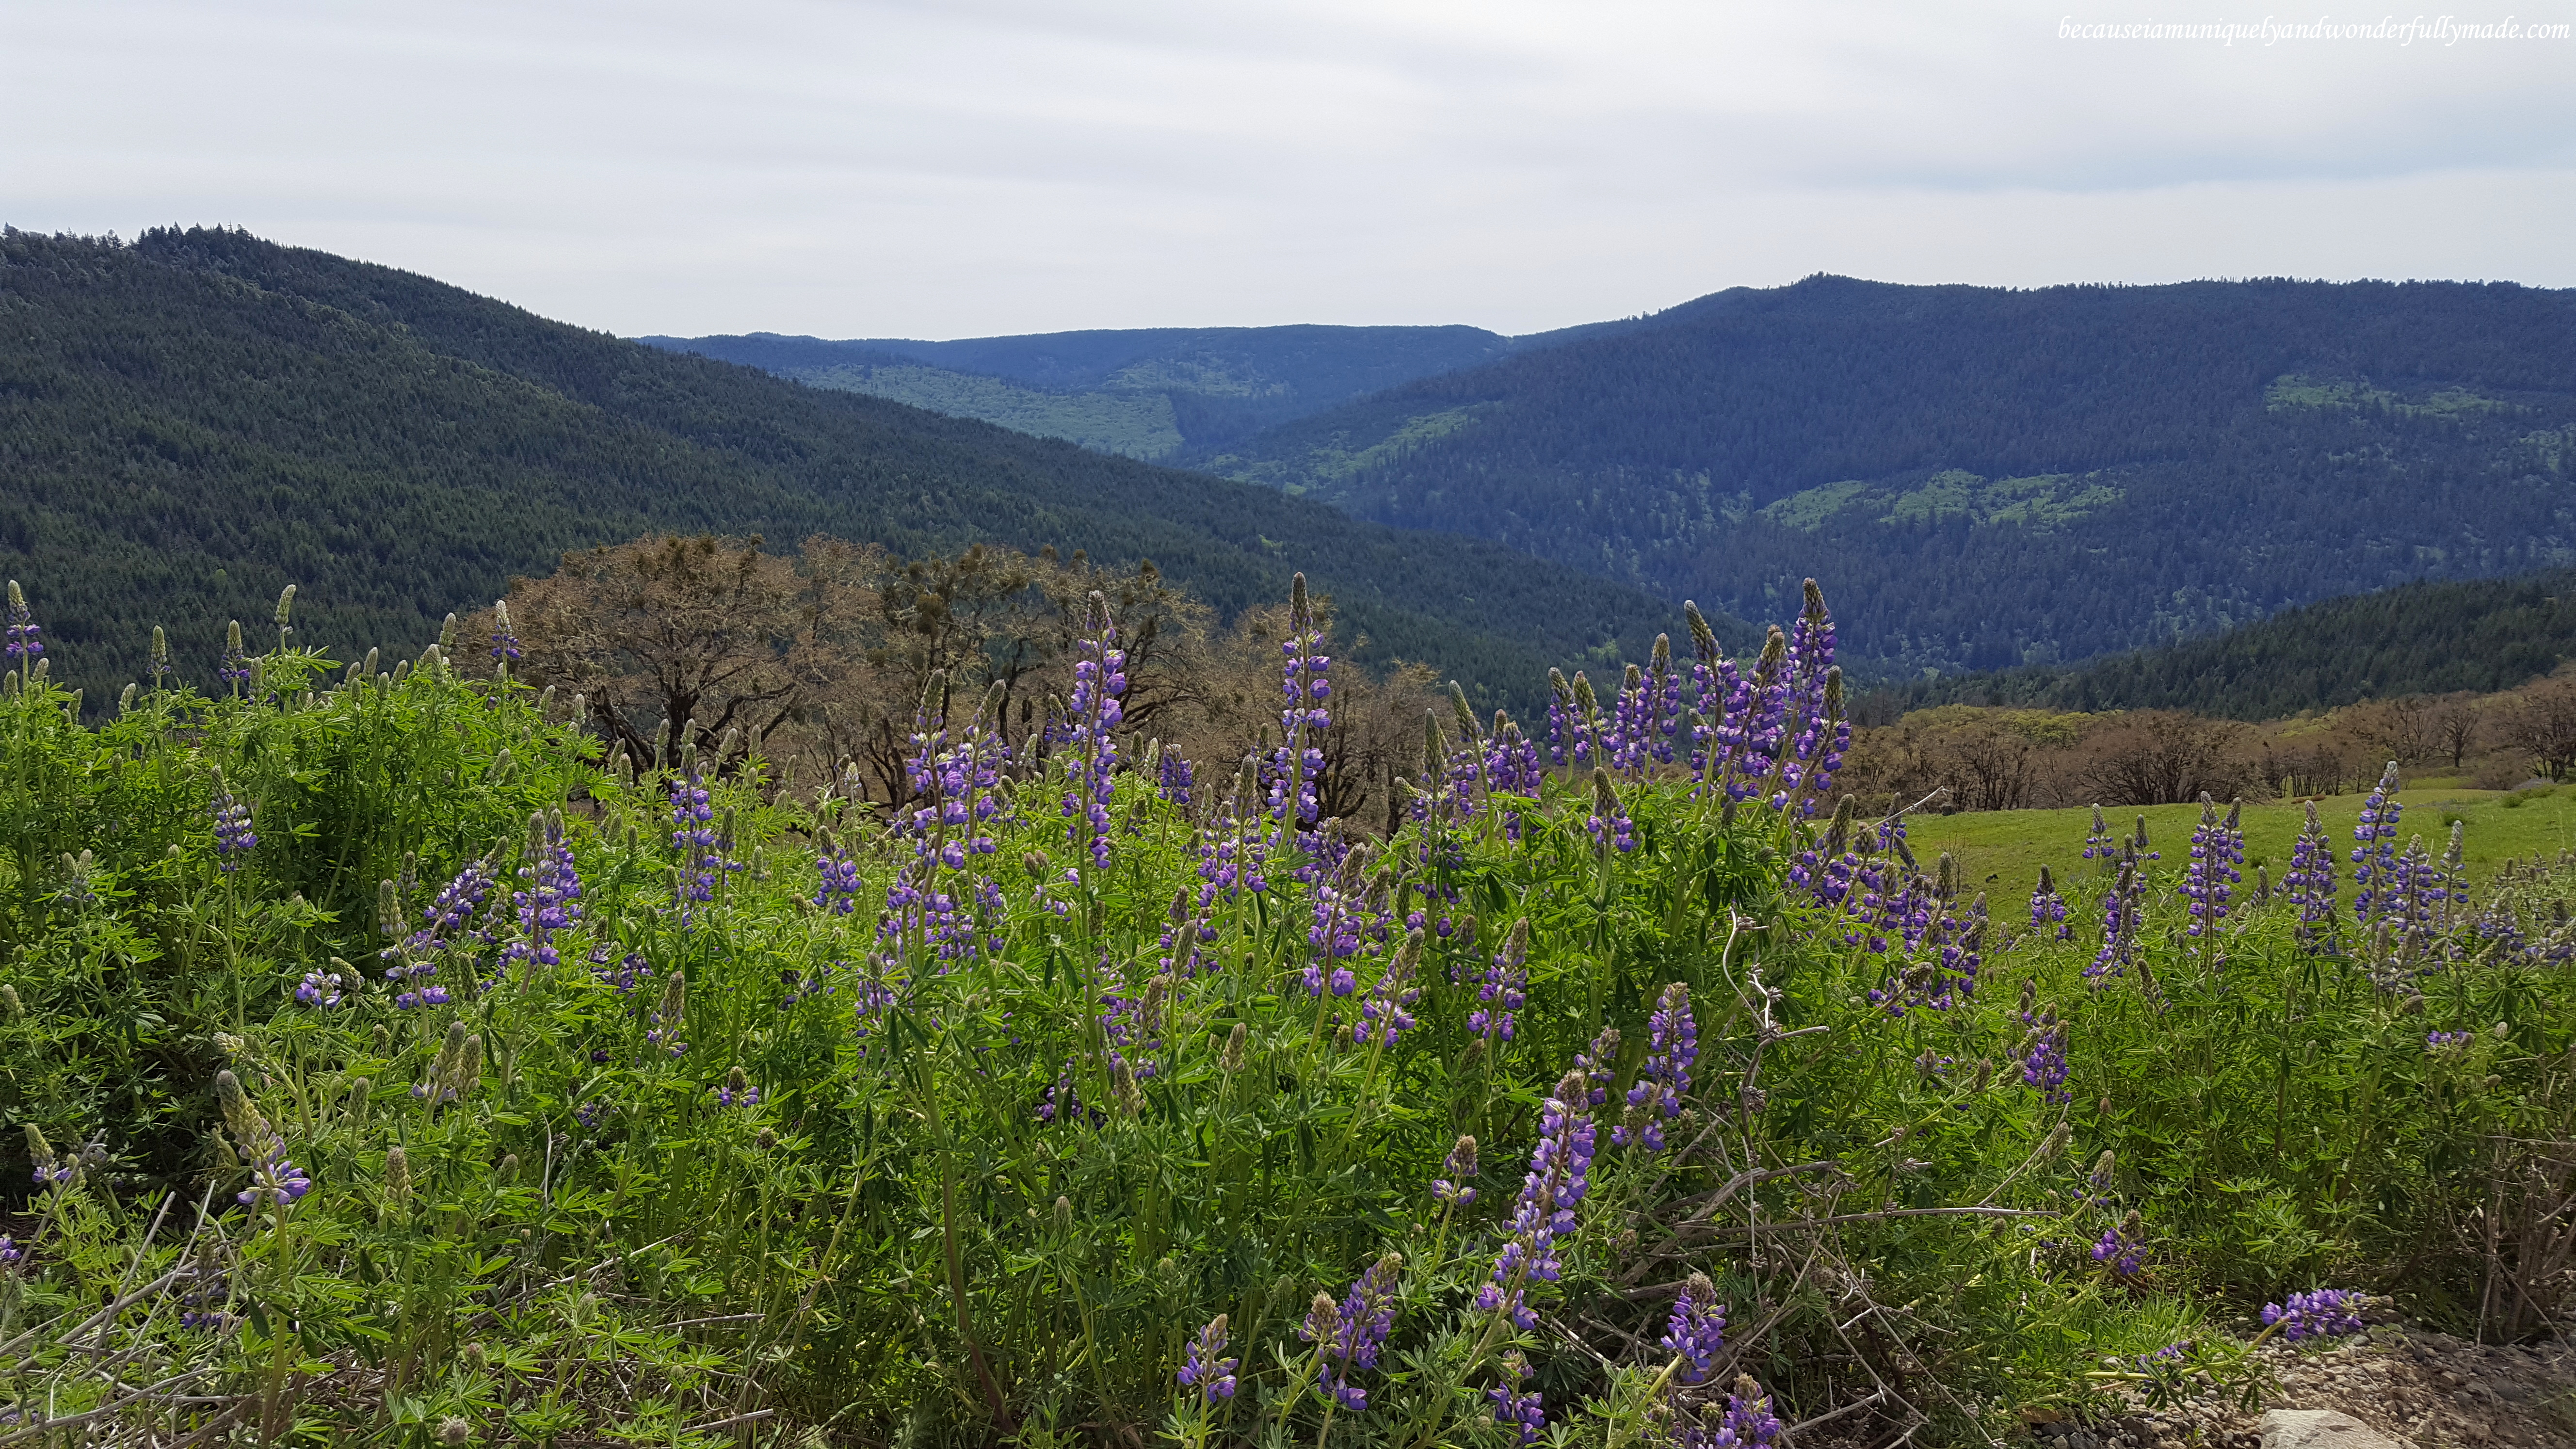 Picturesque mountain view and wild lupines along Bald Hills Road.